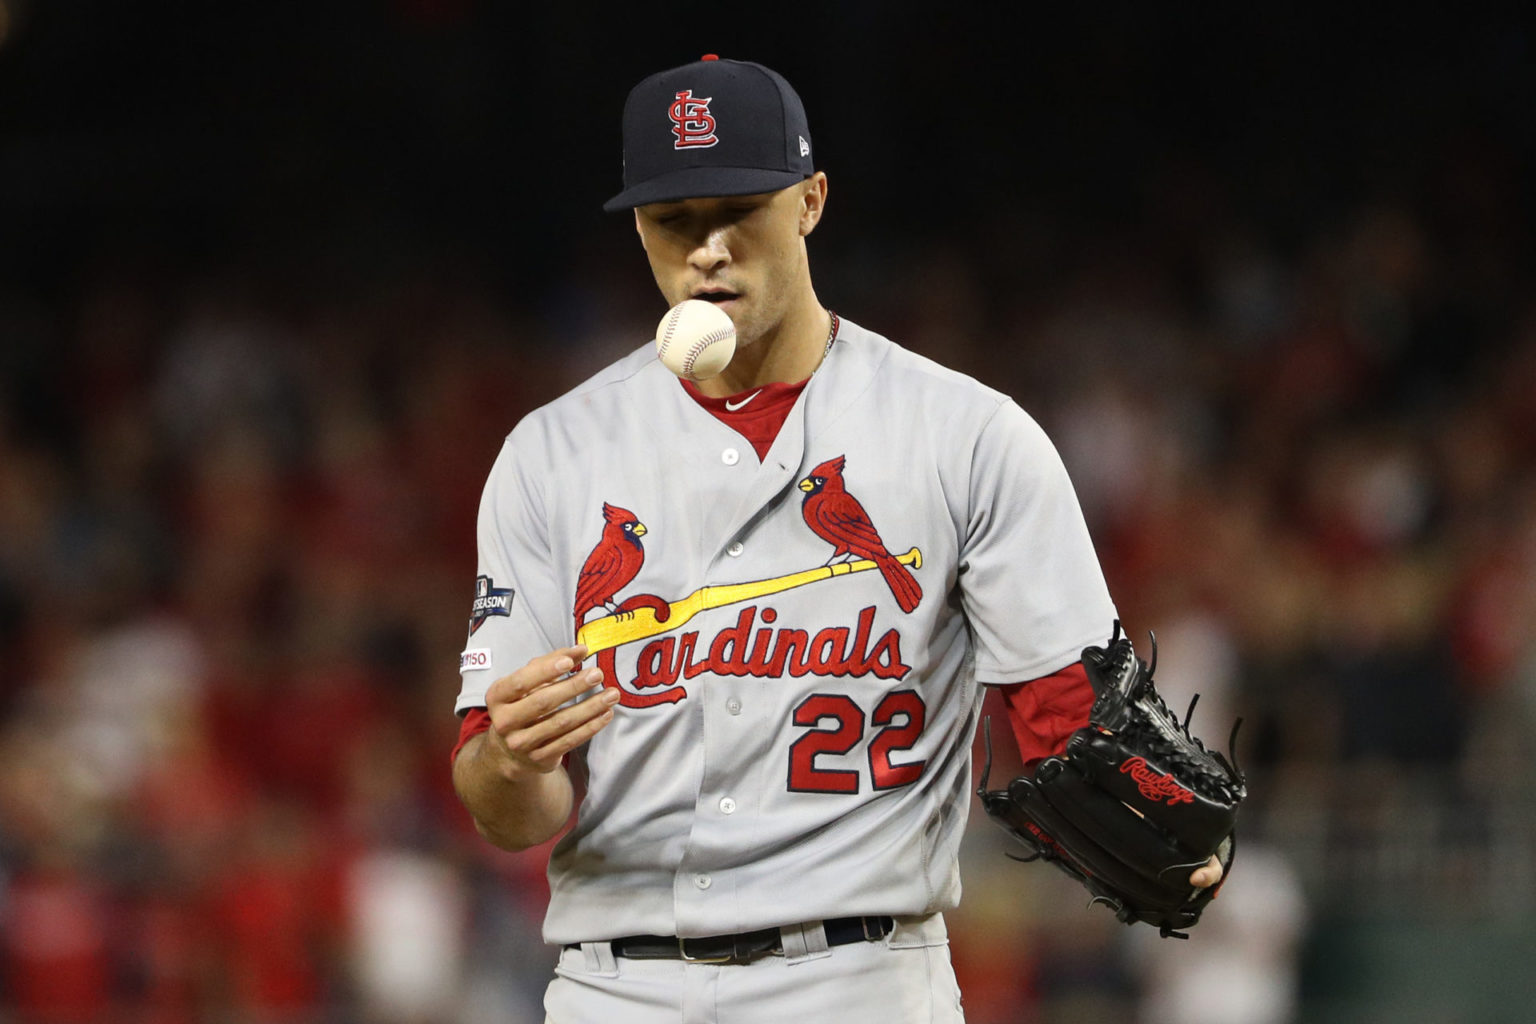 St. Louis Cardinals 2021 Projected Pitching Rotation